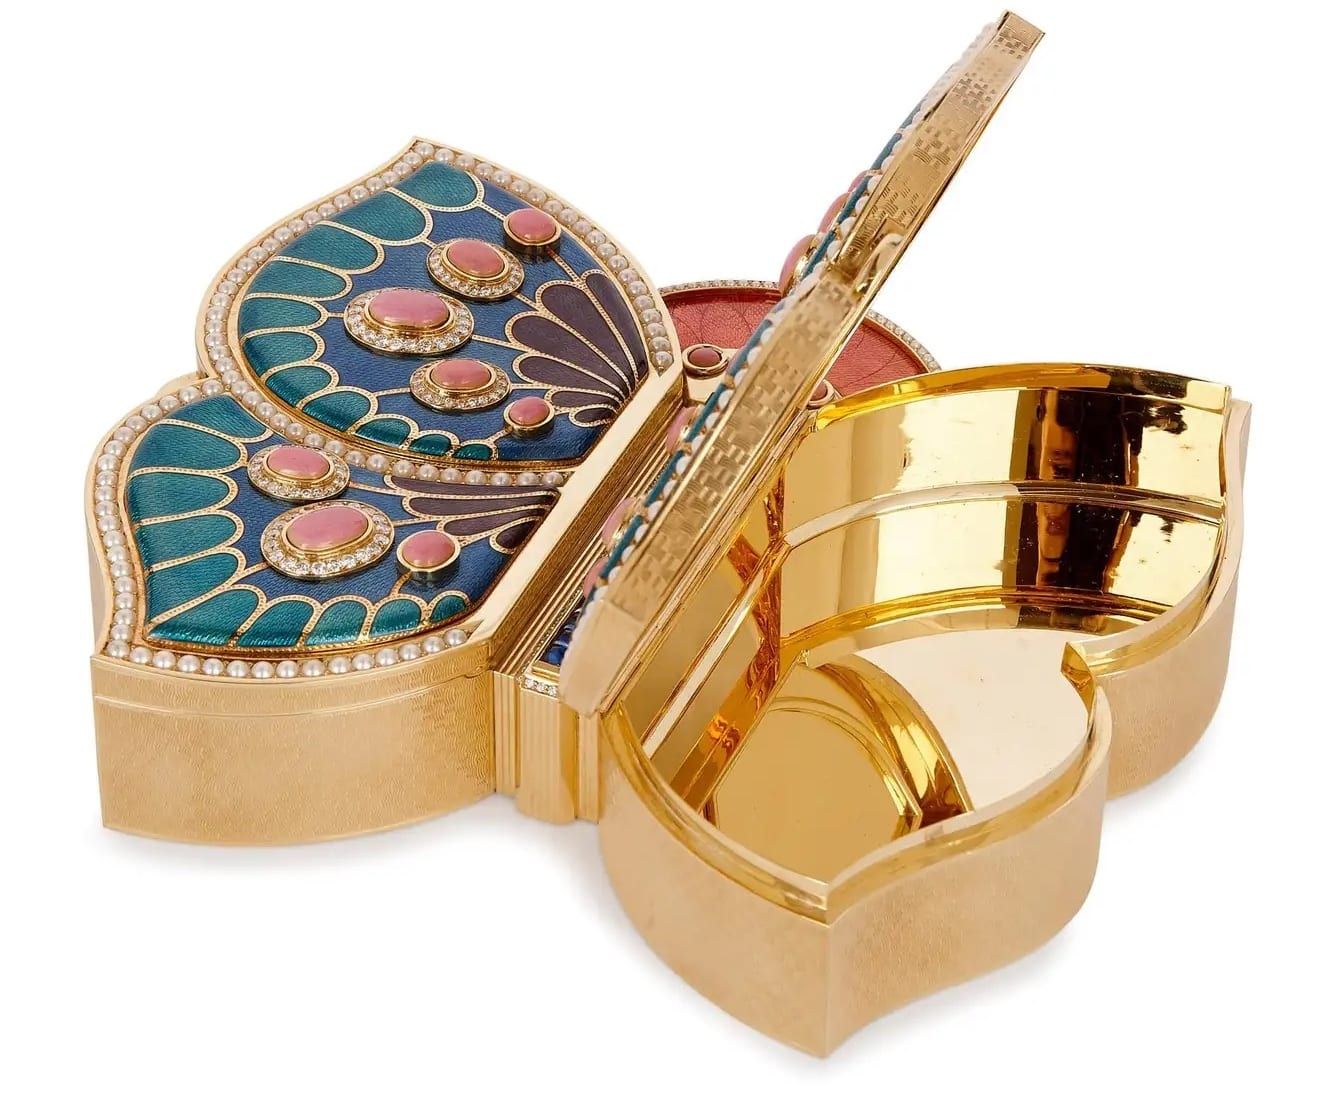 These Lovely Vintage Jewelry Boxes Store Your Valuables in Style